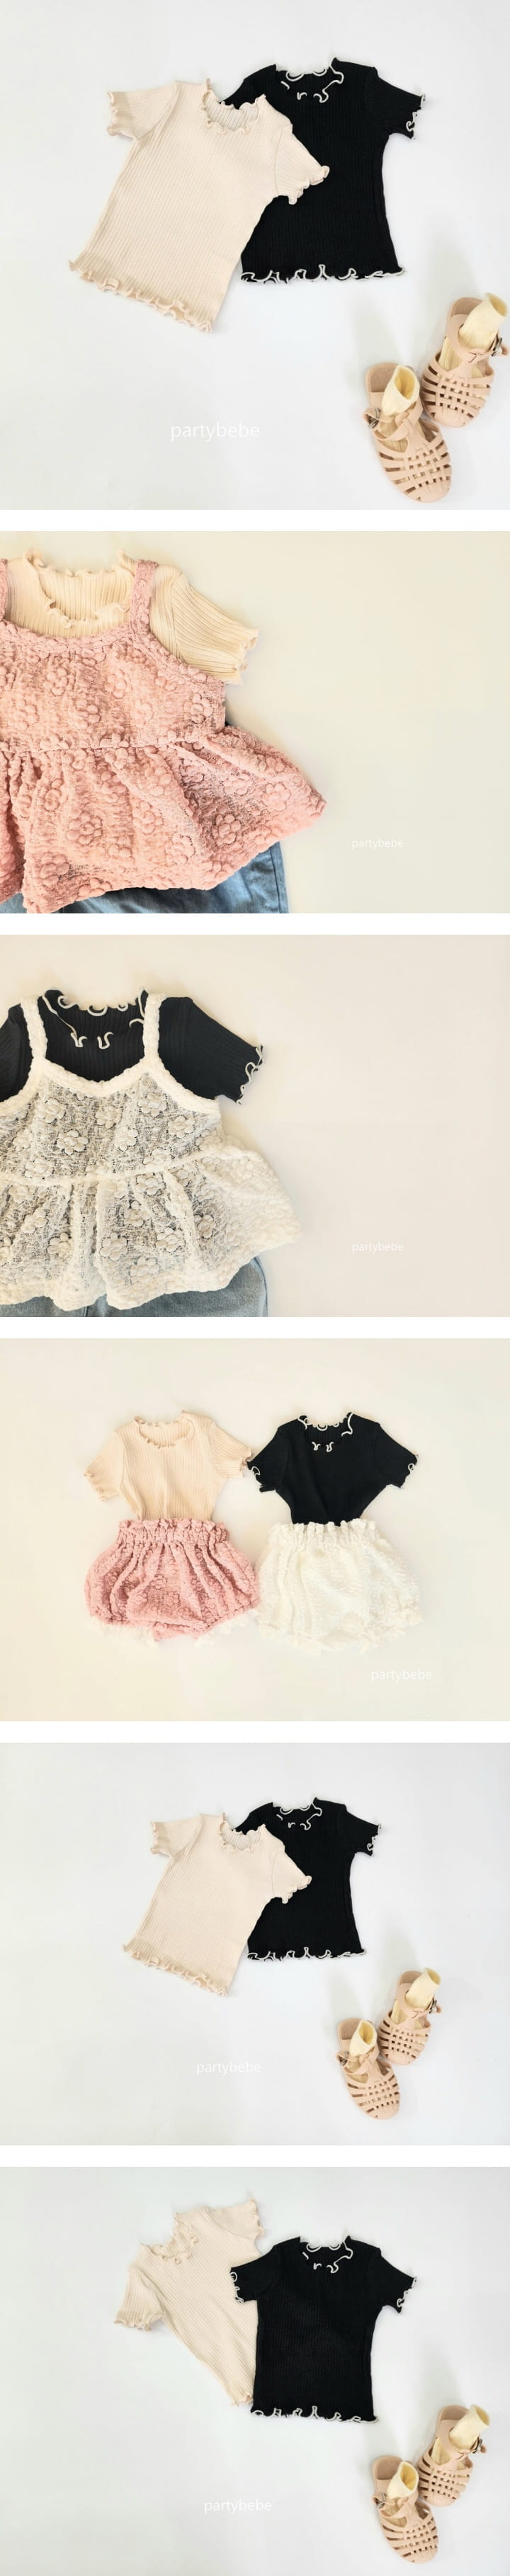 Party Kids - Korean Baby Fashion - #babyboutiqueclothing - Pure Tee - 2